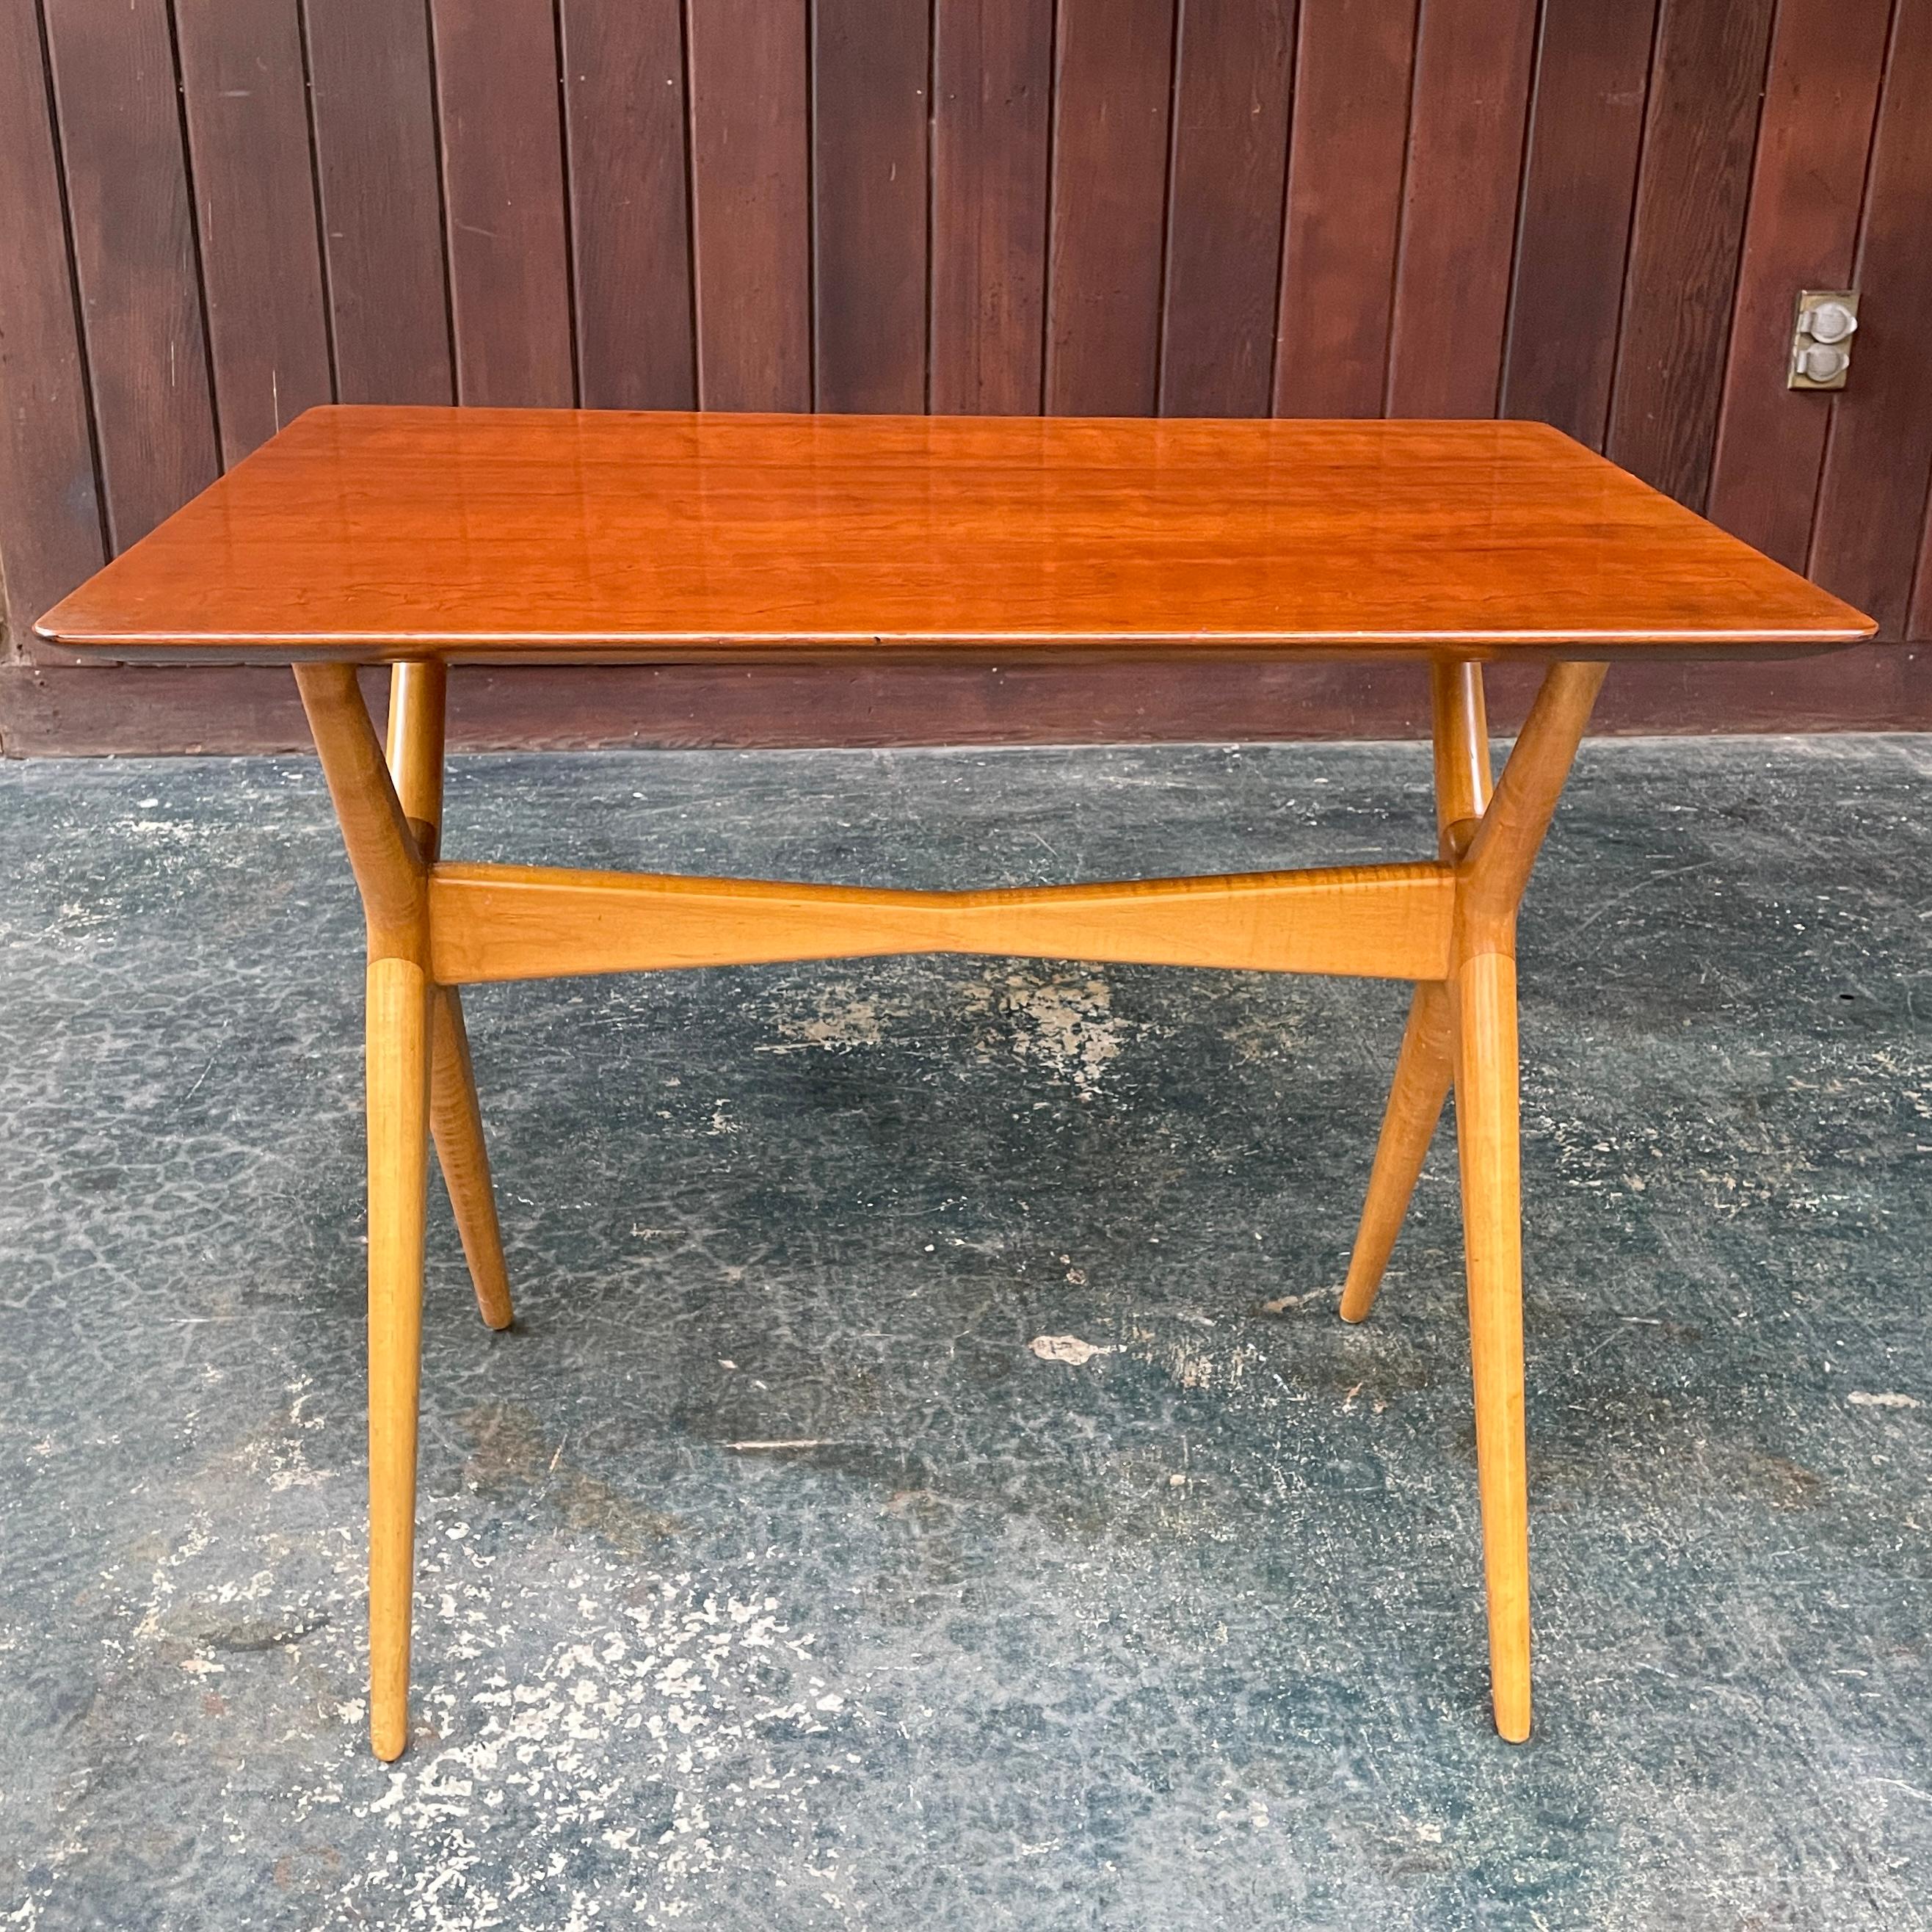 Petite table.

W 30 x D 20 x H 24.25 in.
